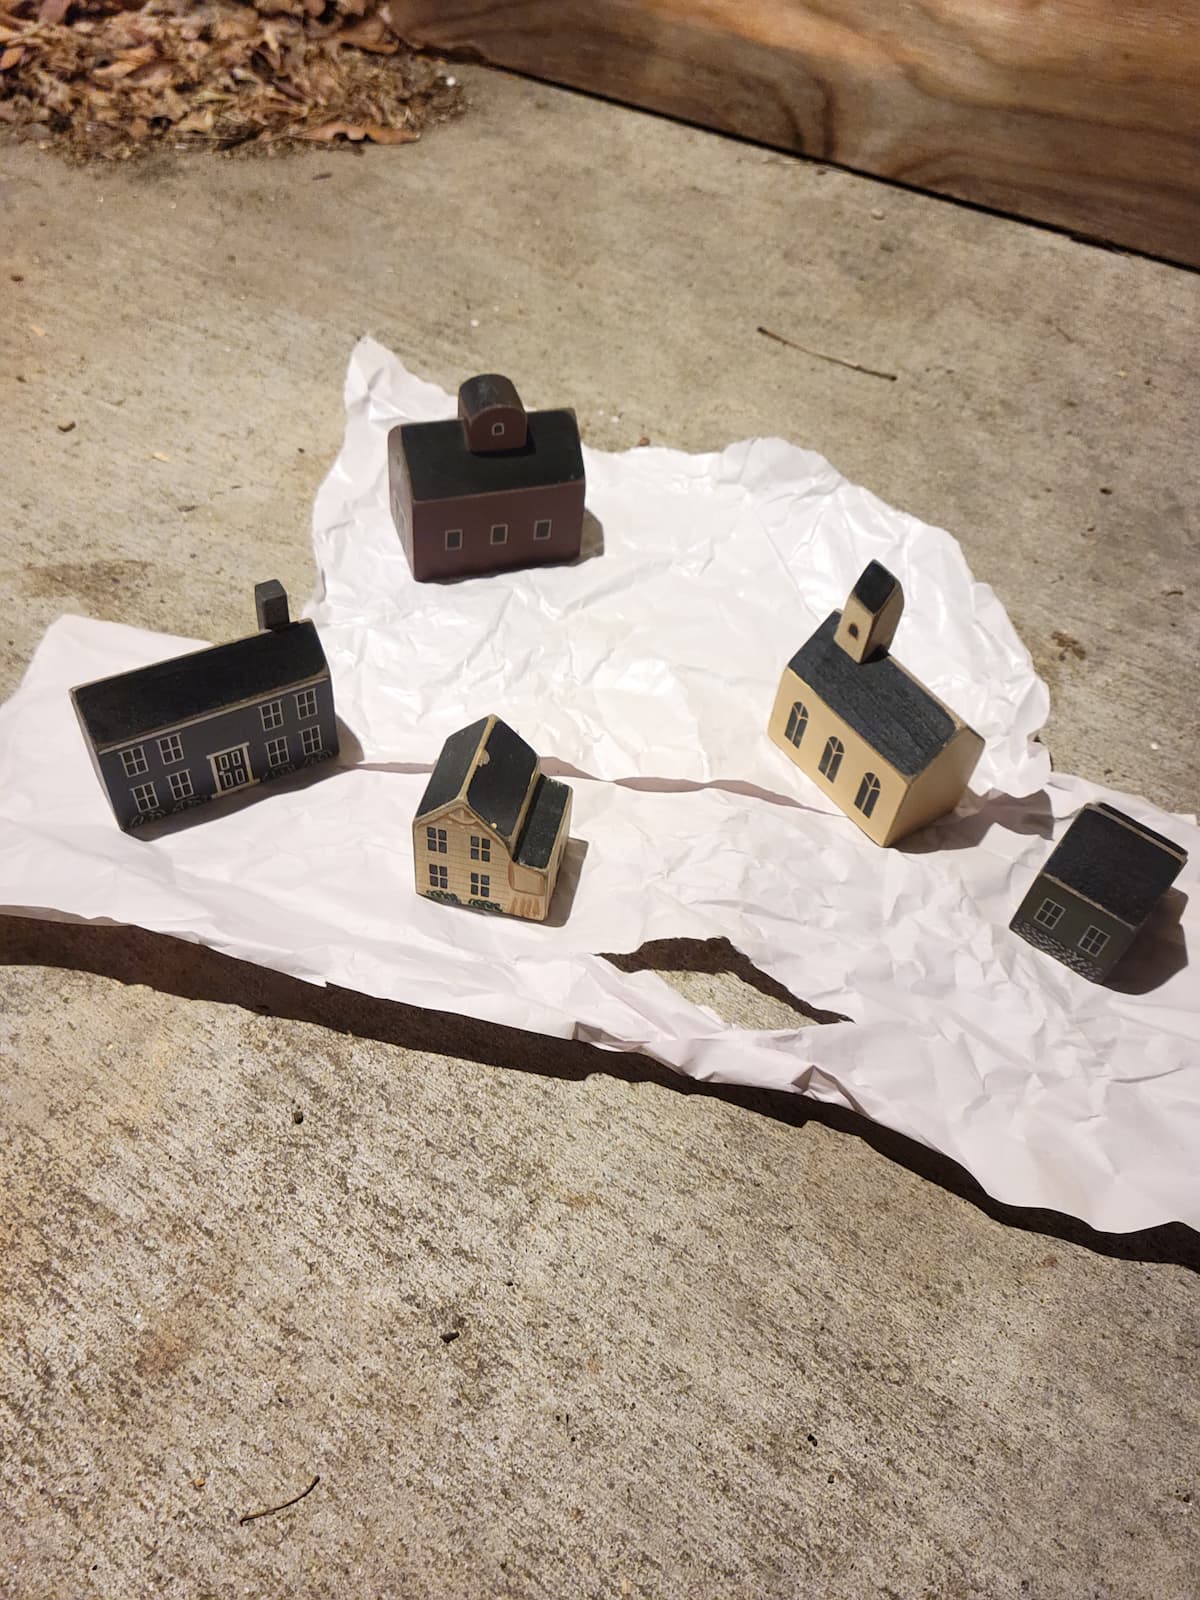 wood block houses on paper